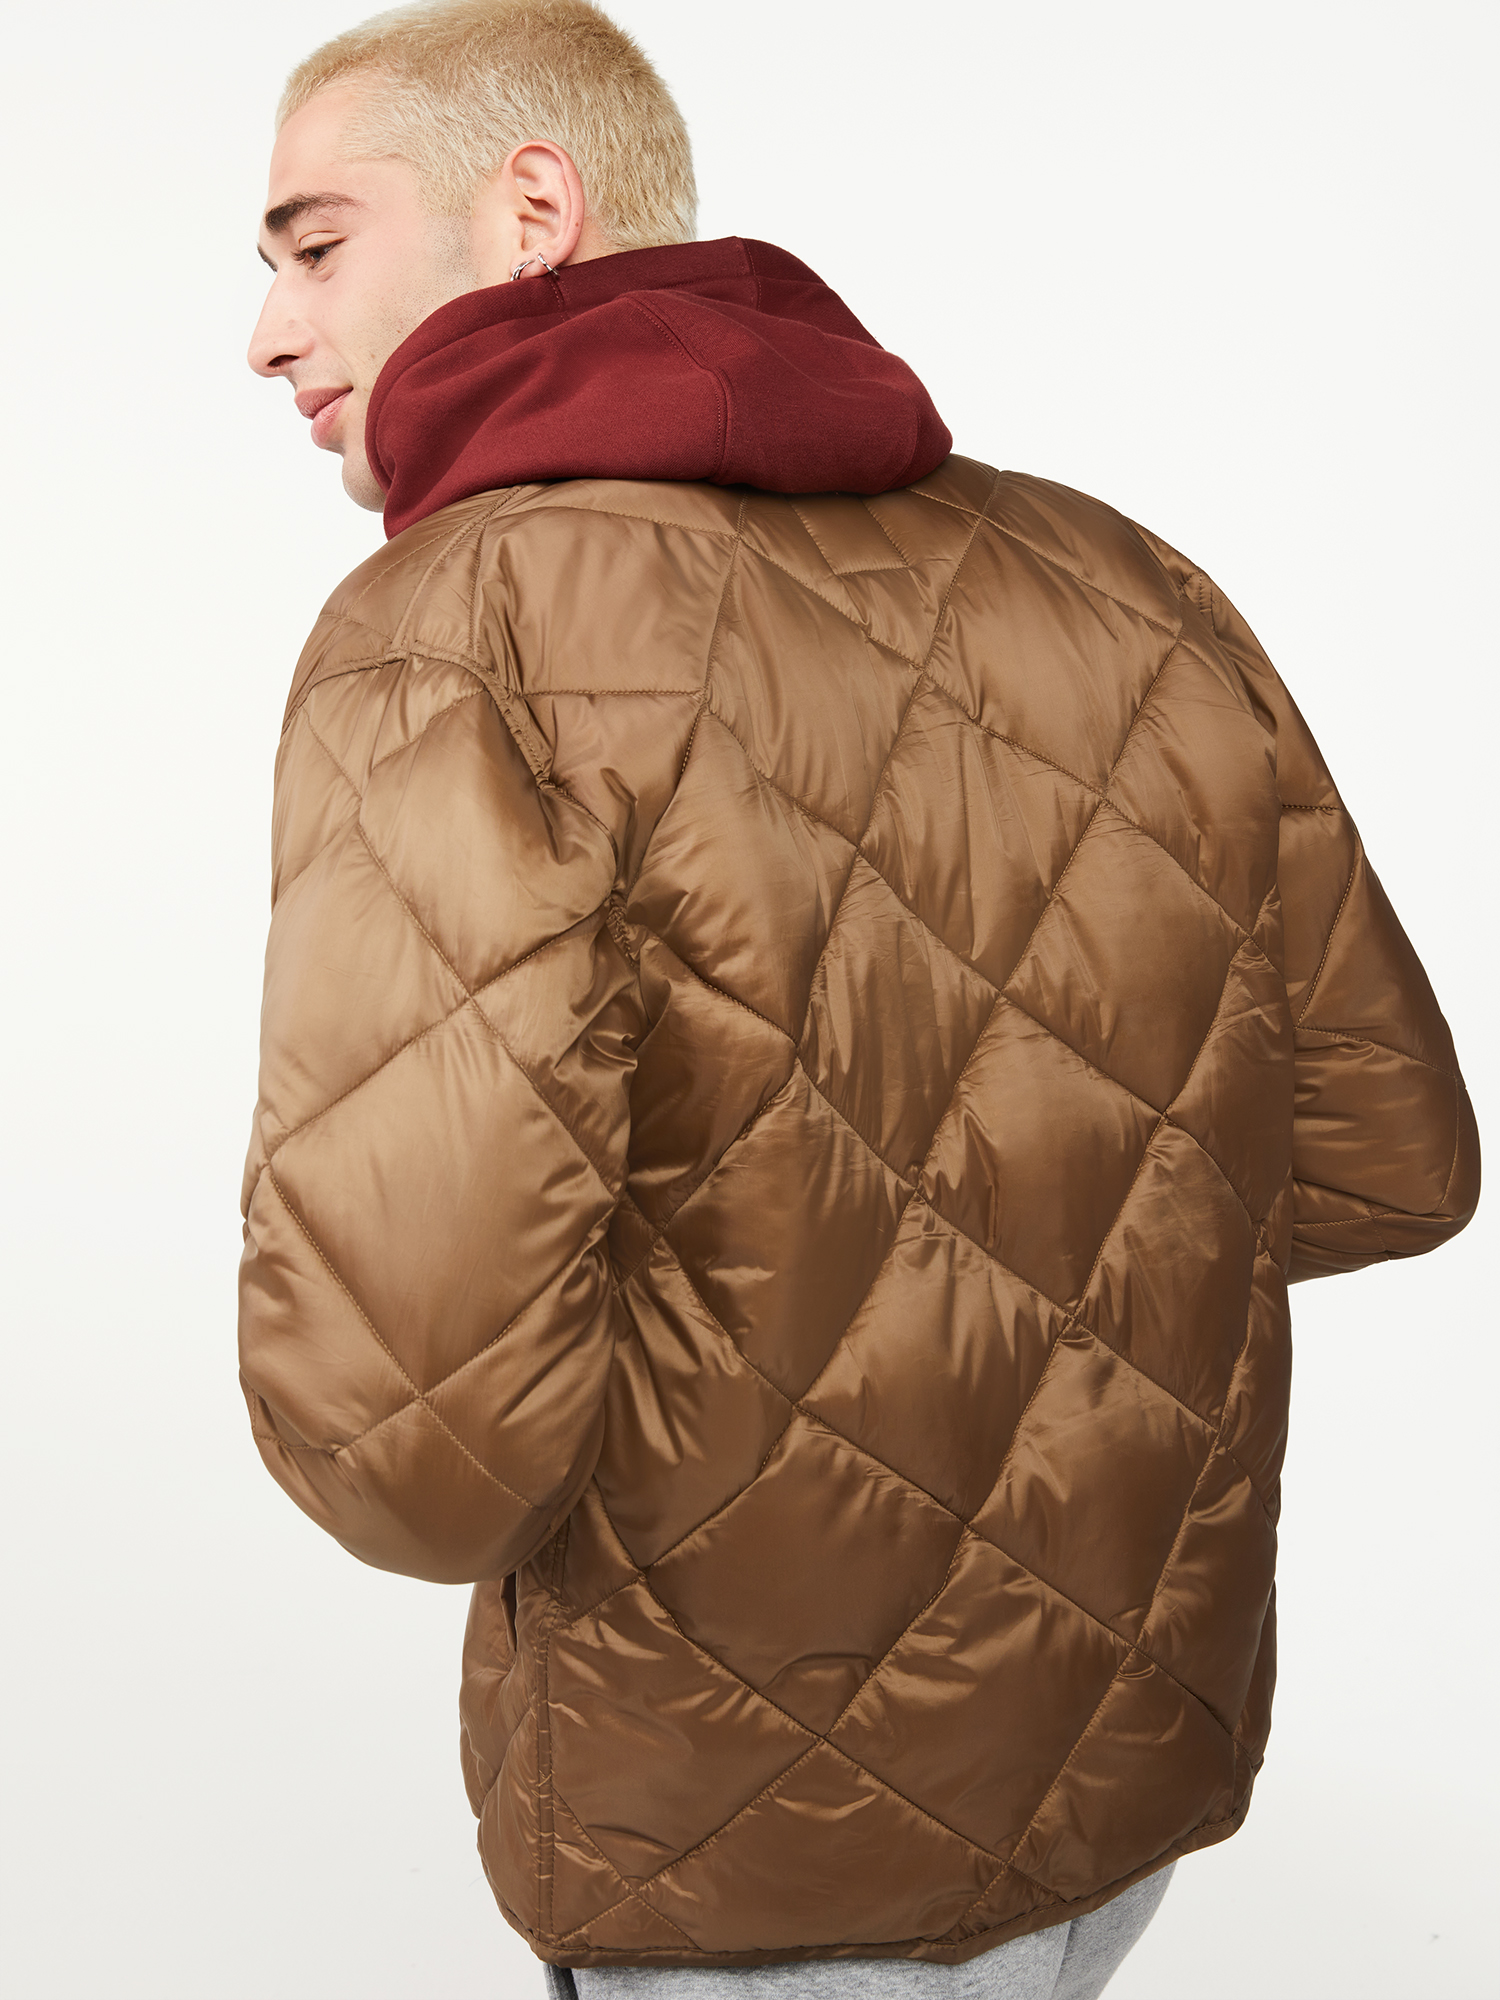 Free Assembly Men's Quilted Bomber Jacket - image 4 of 6